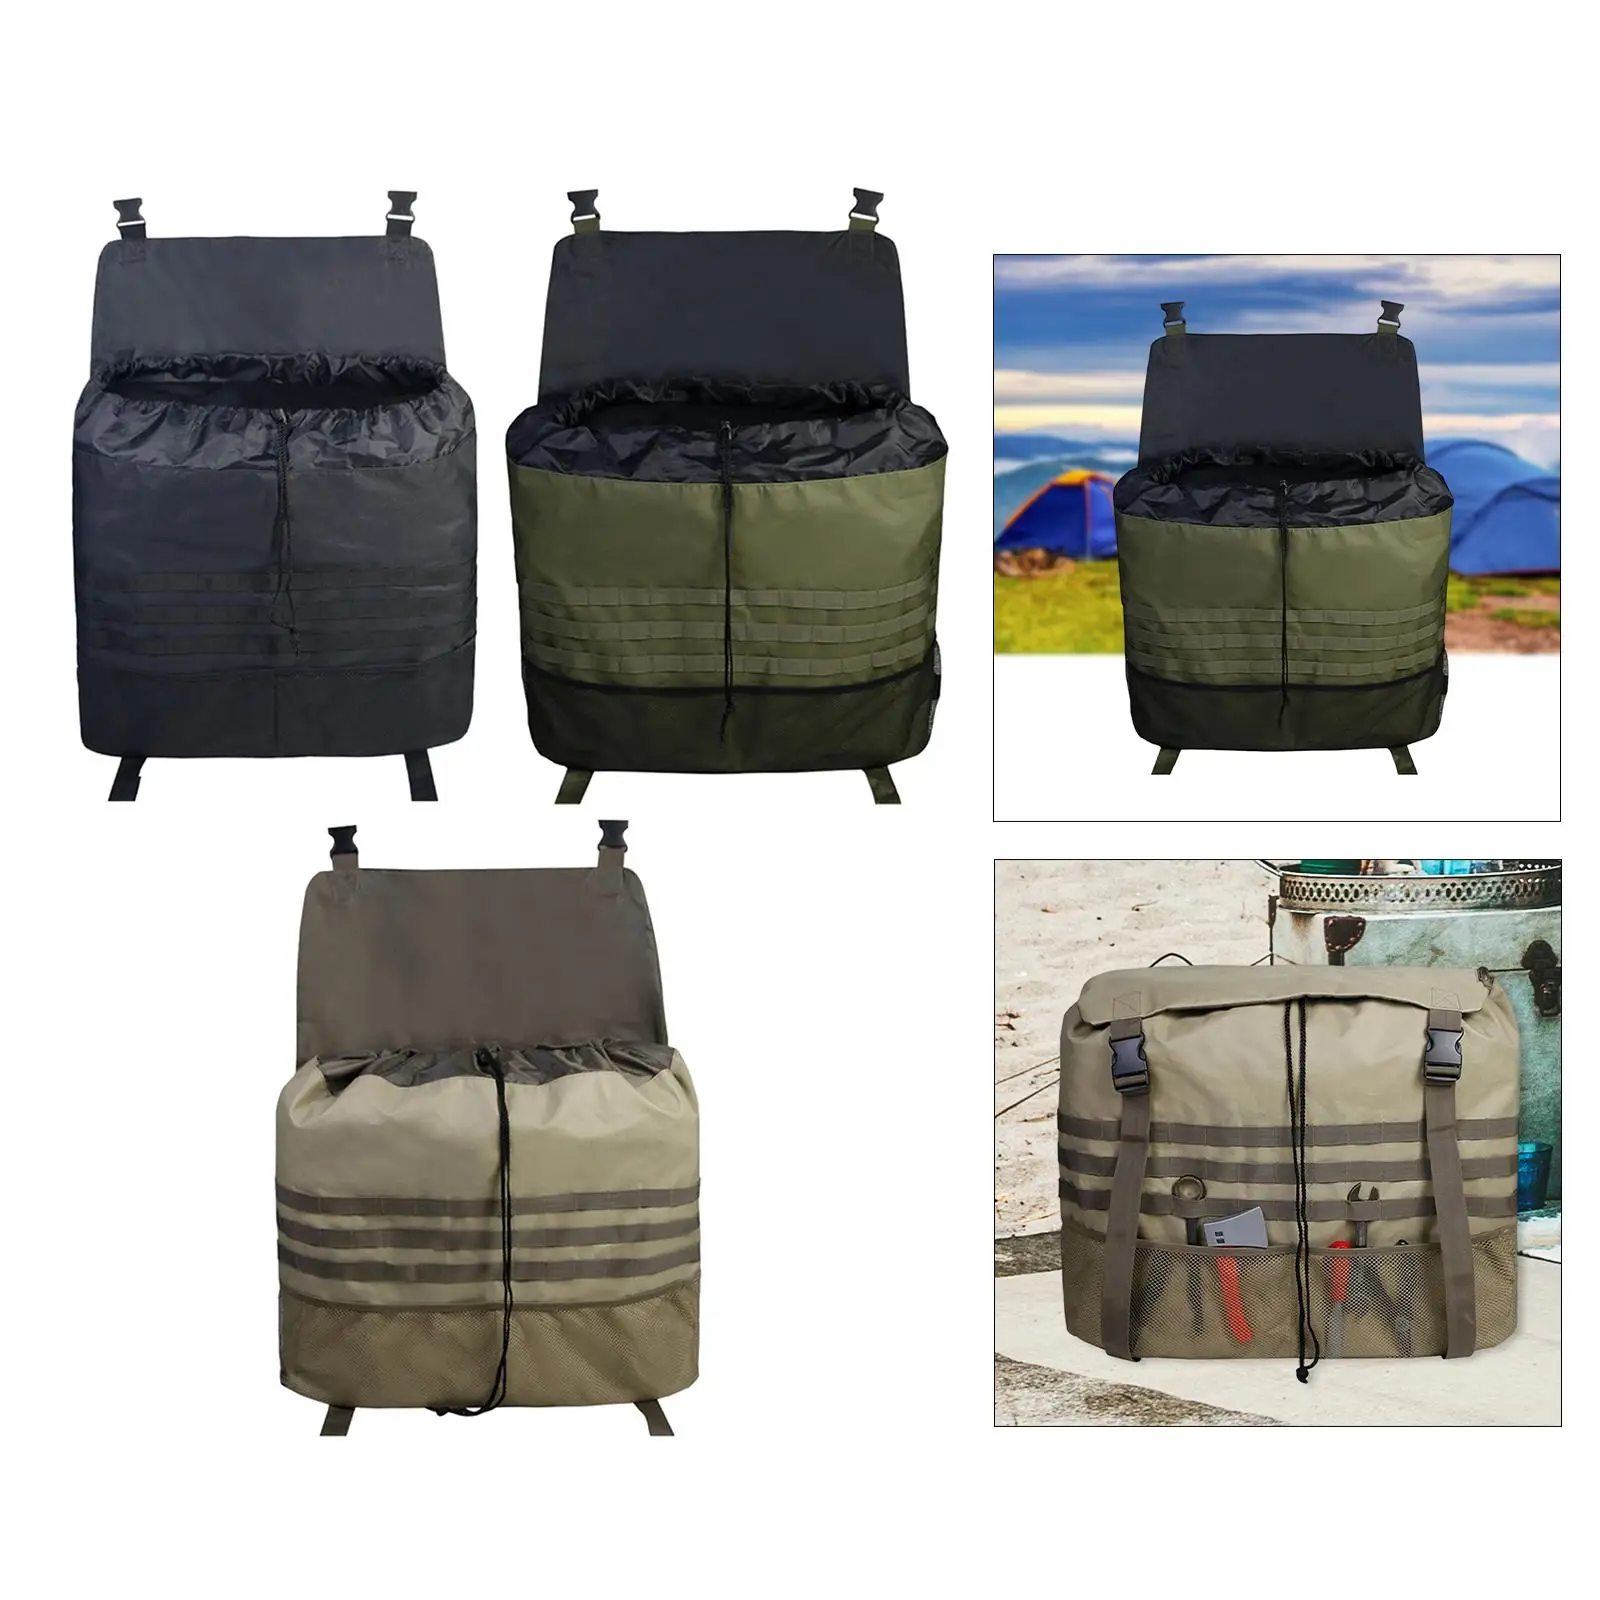 High capacity Spare Tire Storage tool Off Camping Gear With Adjustable Straps